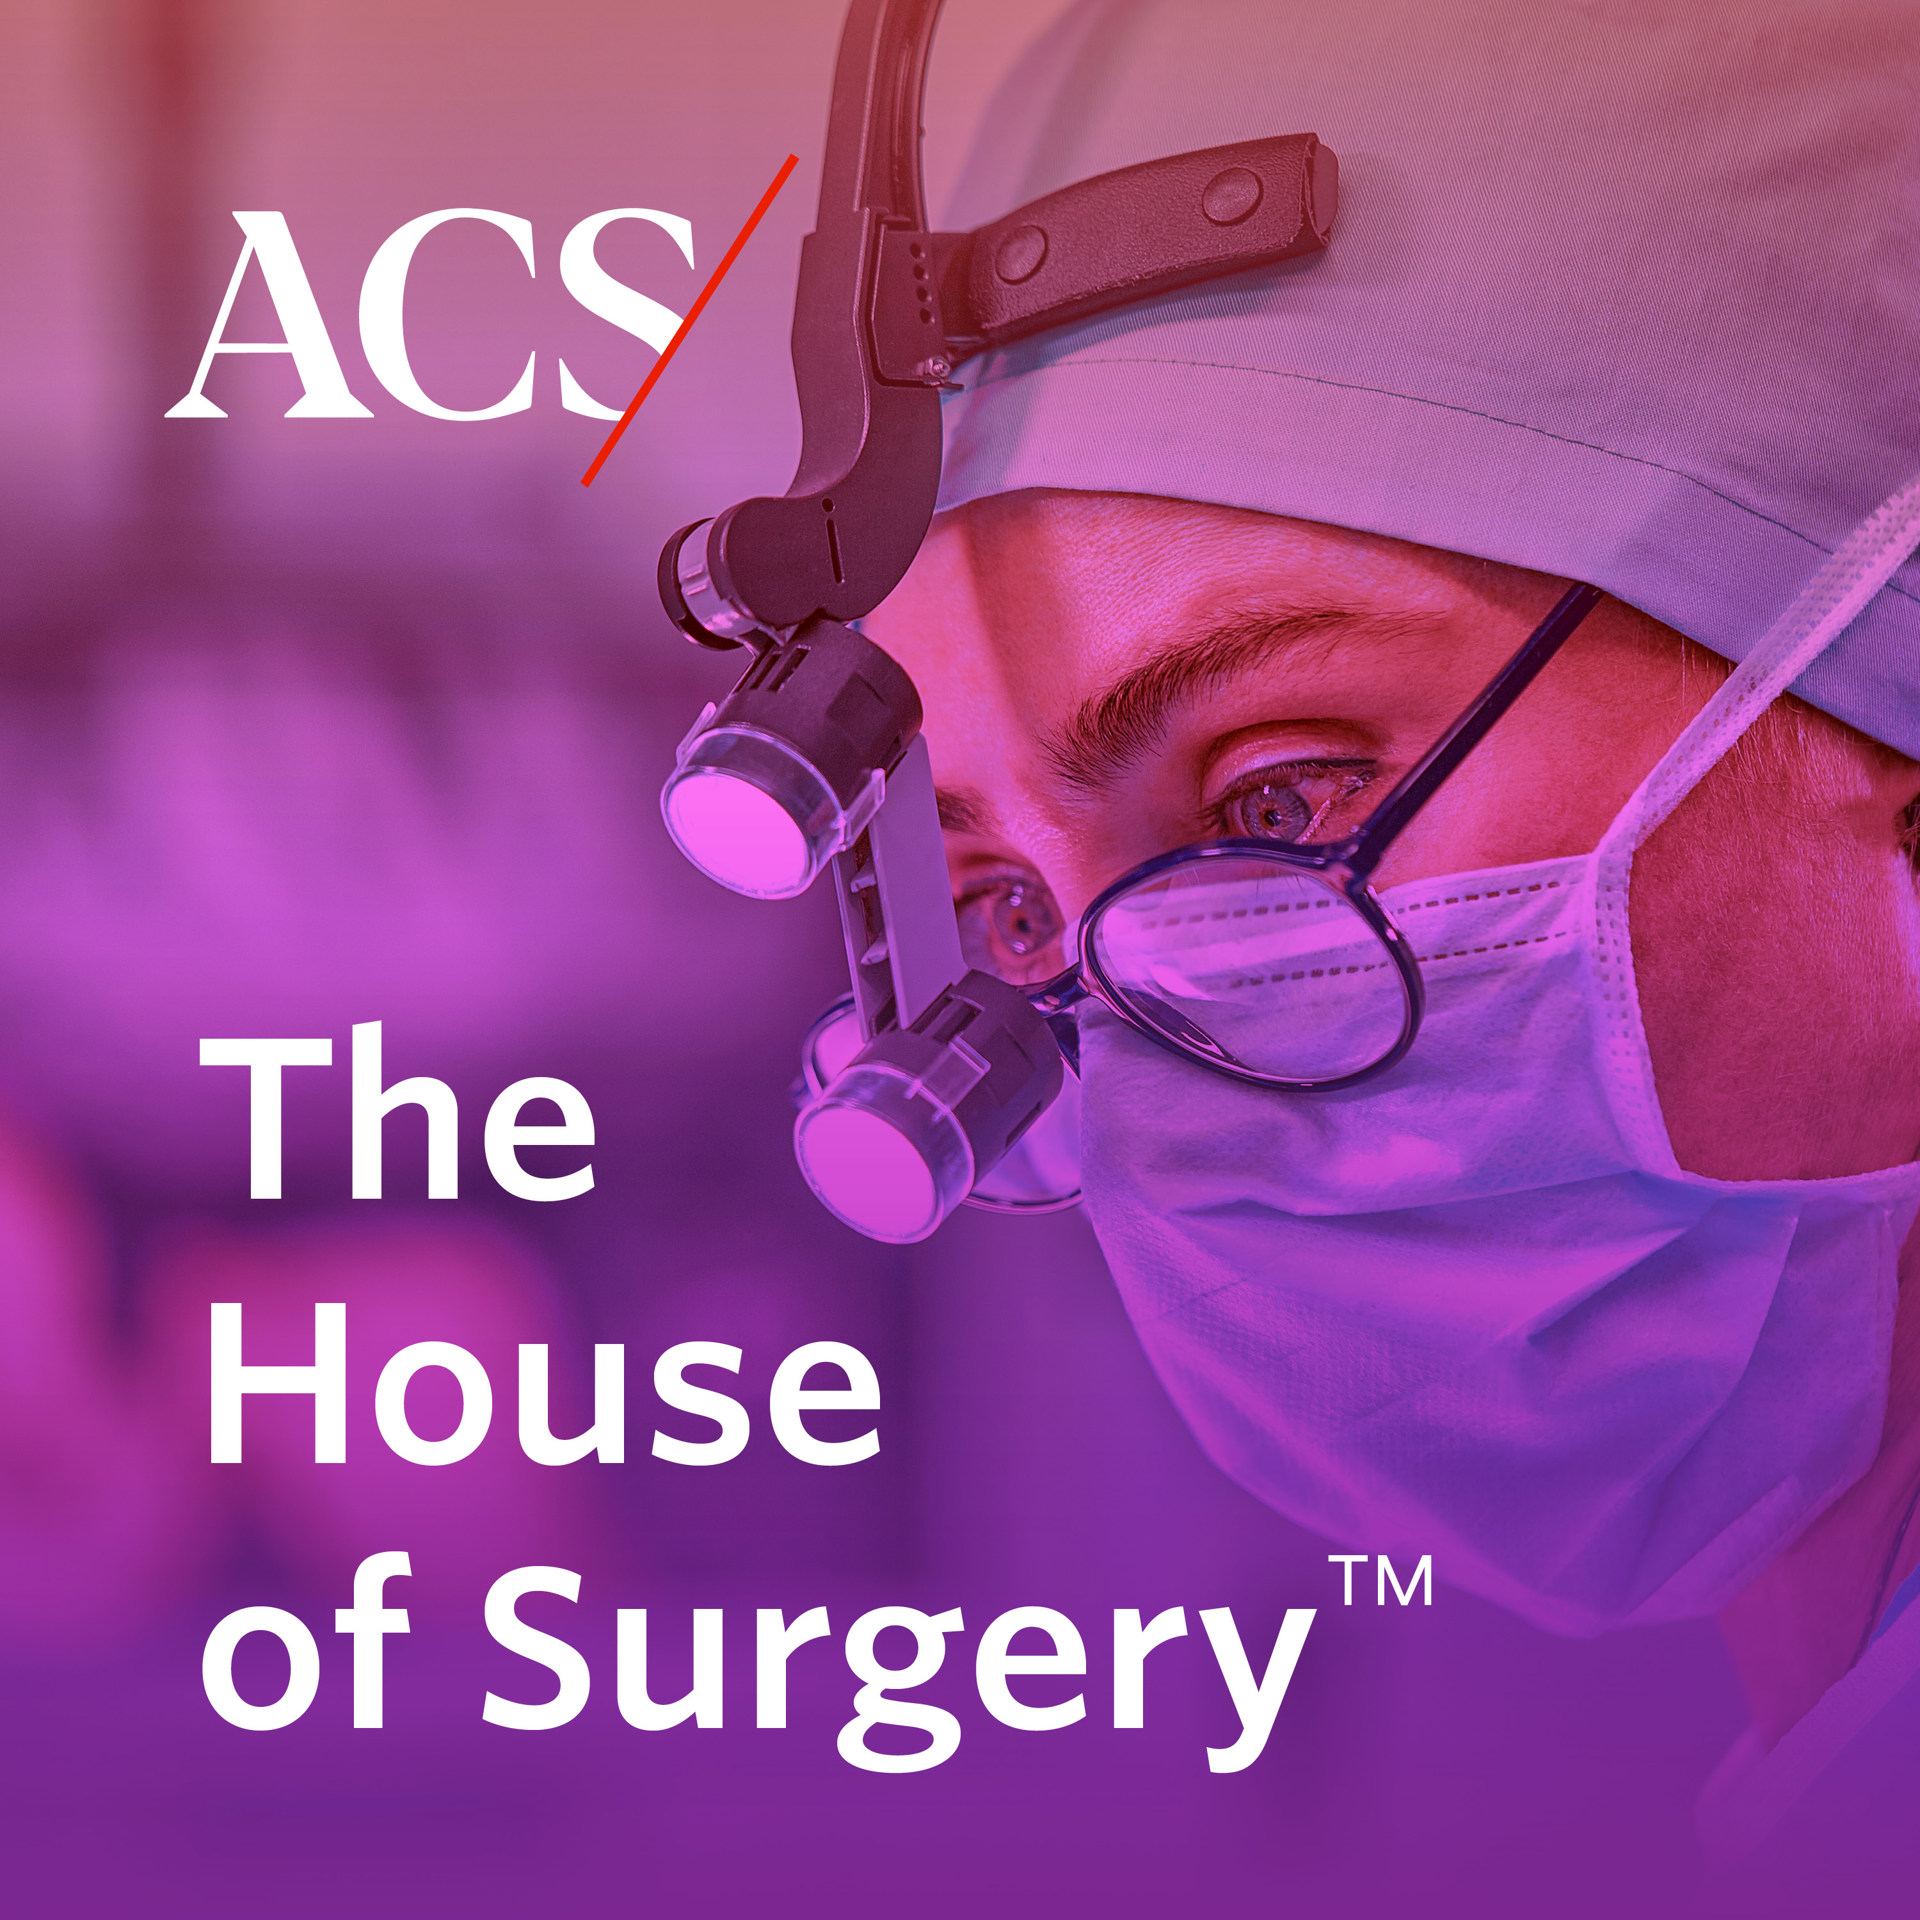 Hear about What’s Ahead for ACS Cancer Programs